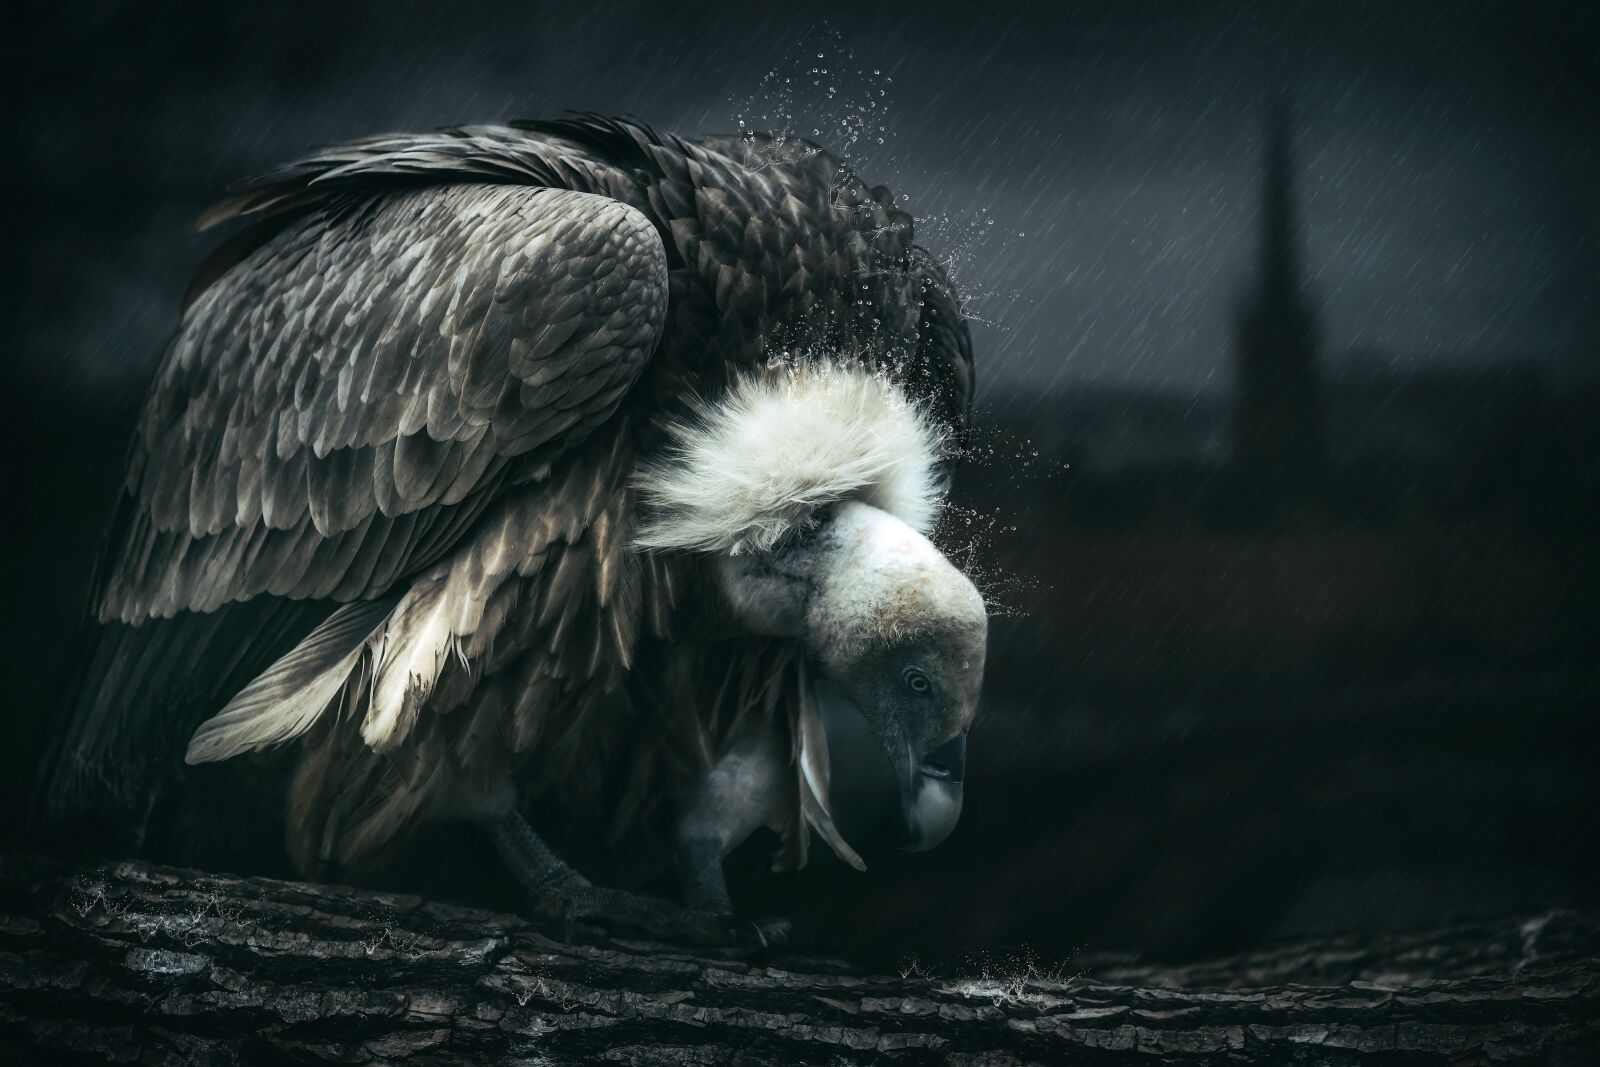 Sony a7 II sample photo. Vulture, mystical, mystery photography